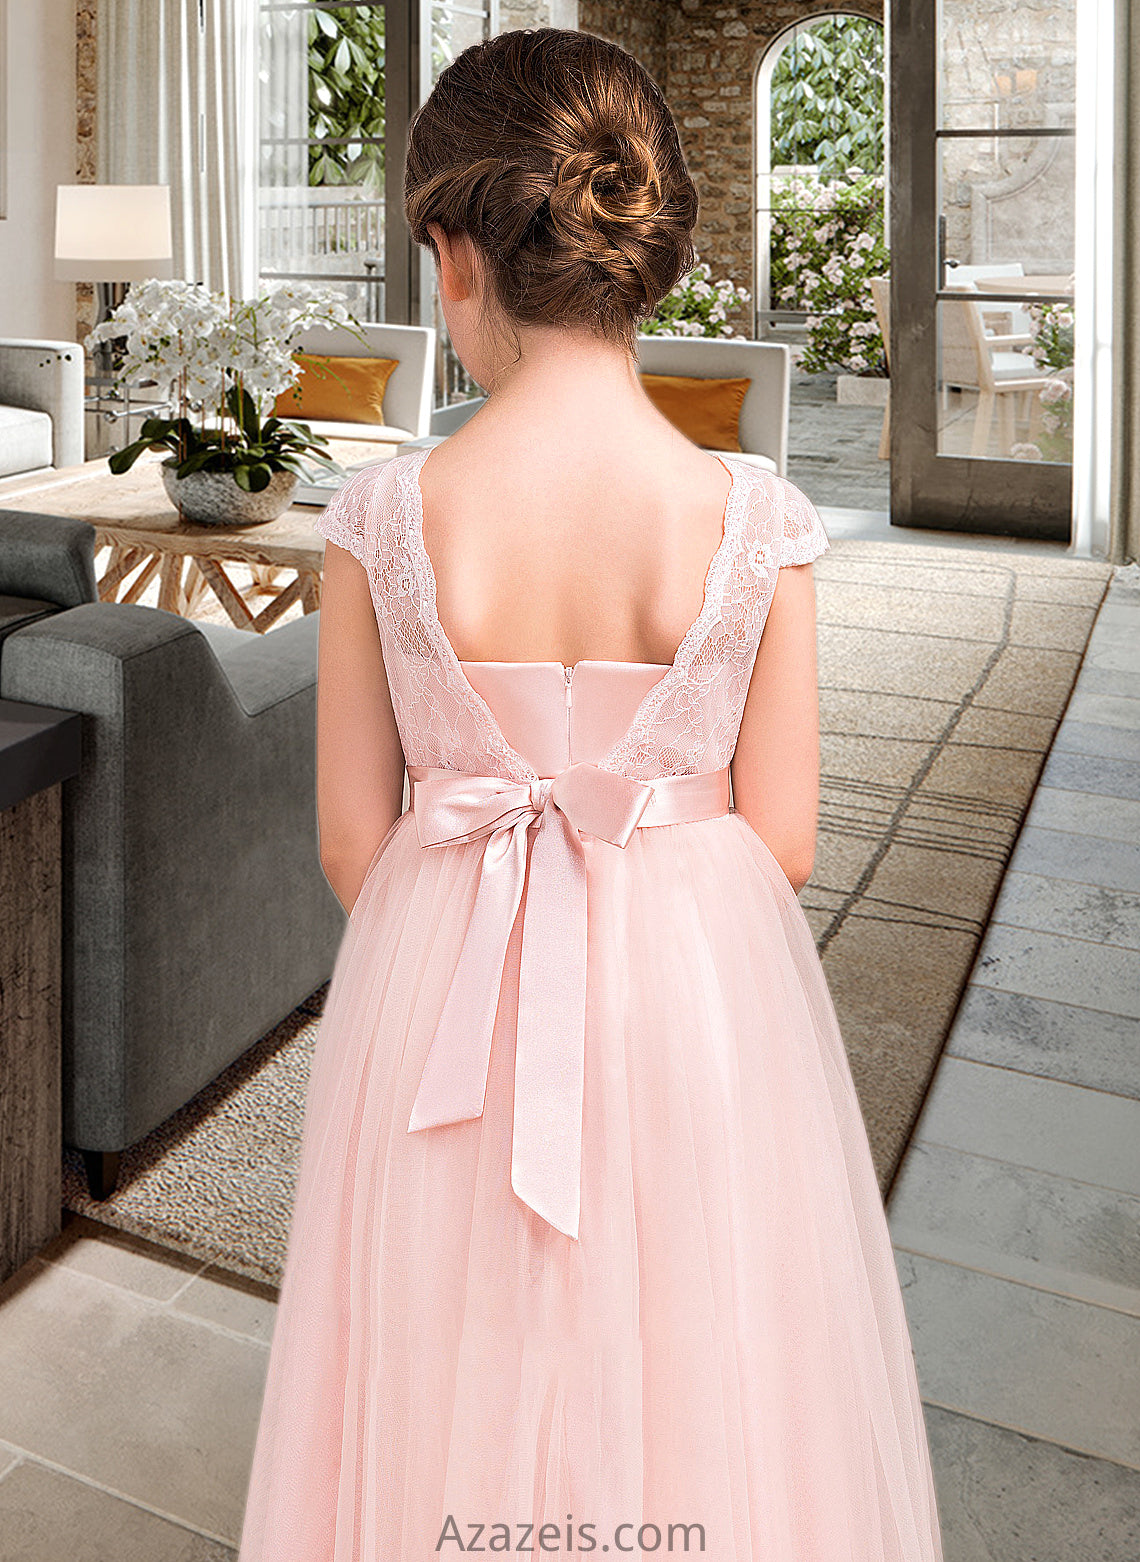 Livia A-Line Scoop Neck Floor-Length Tulle Lace Junior Bridesmaid Dress With Bow(s) DFP0013619